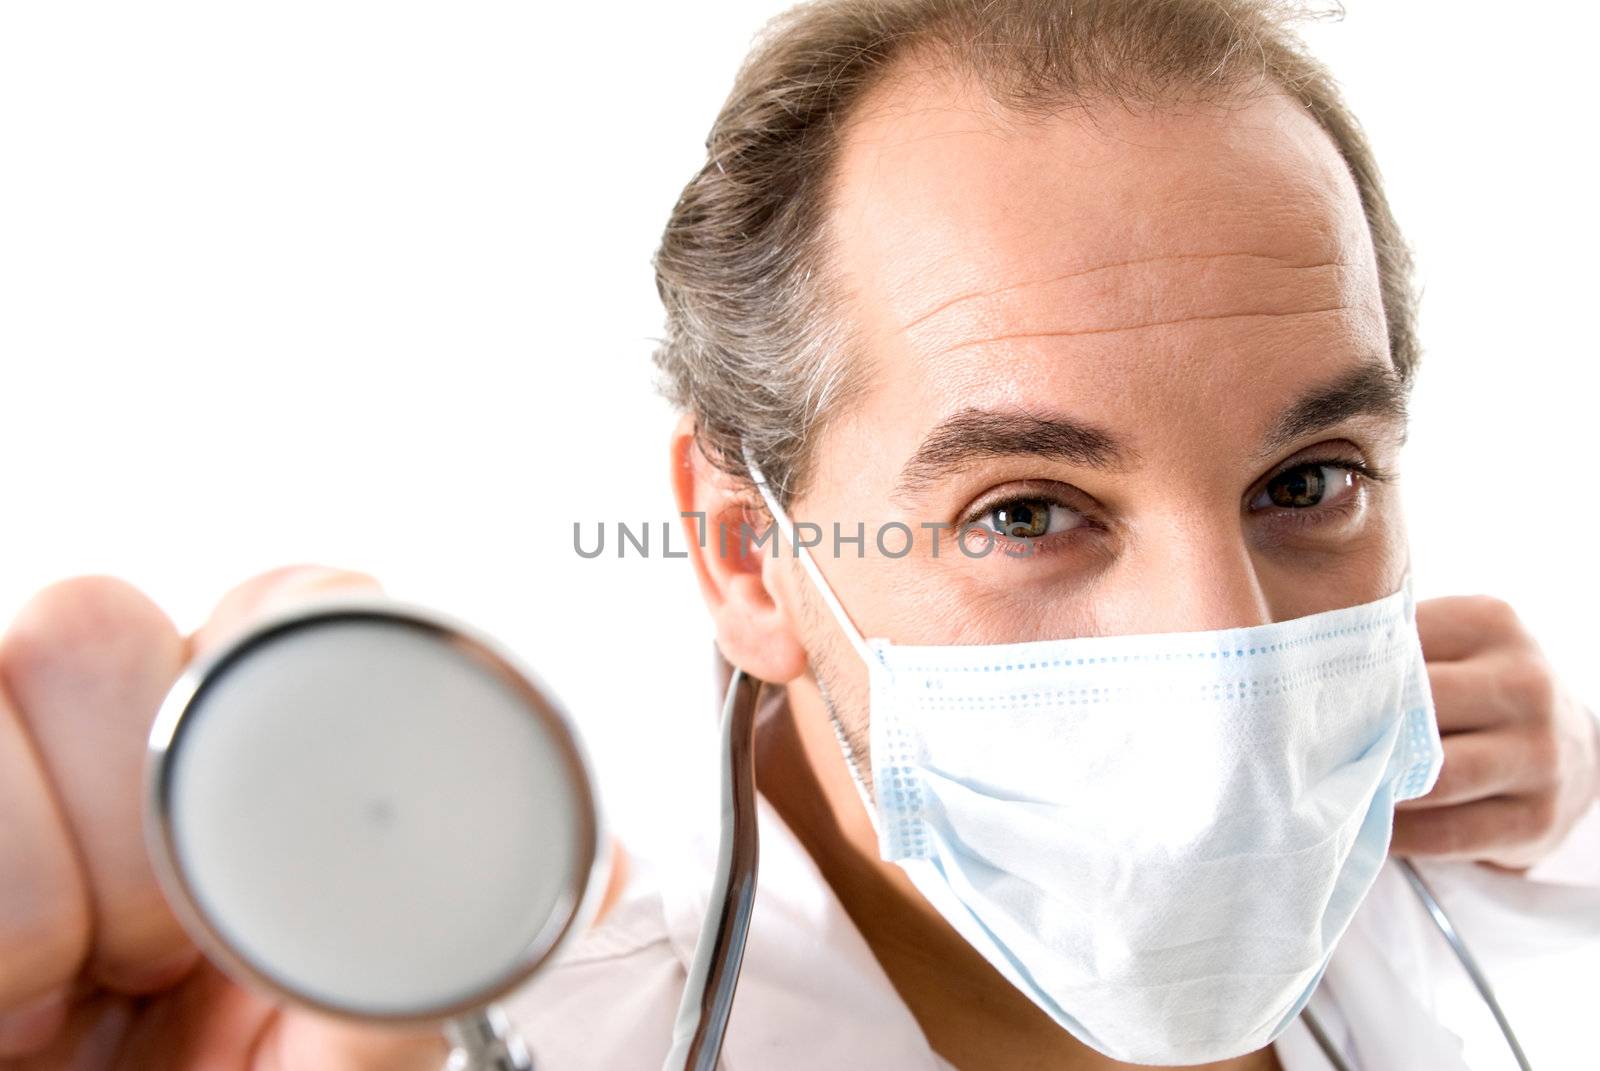 Medic with stethoscope and medical mask on white background.